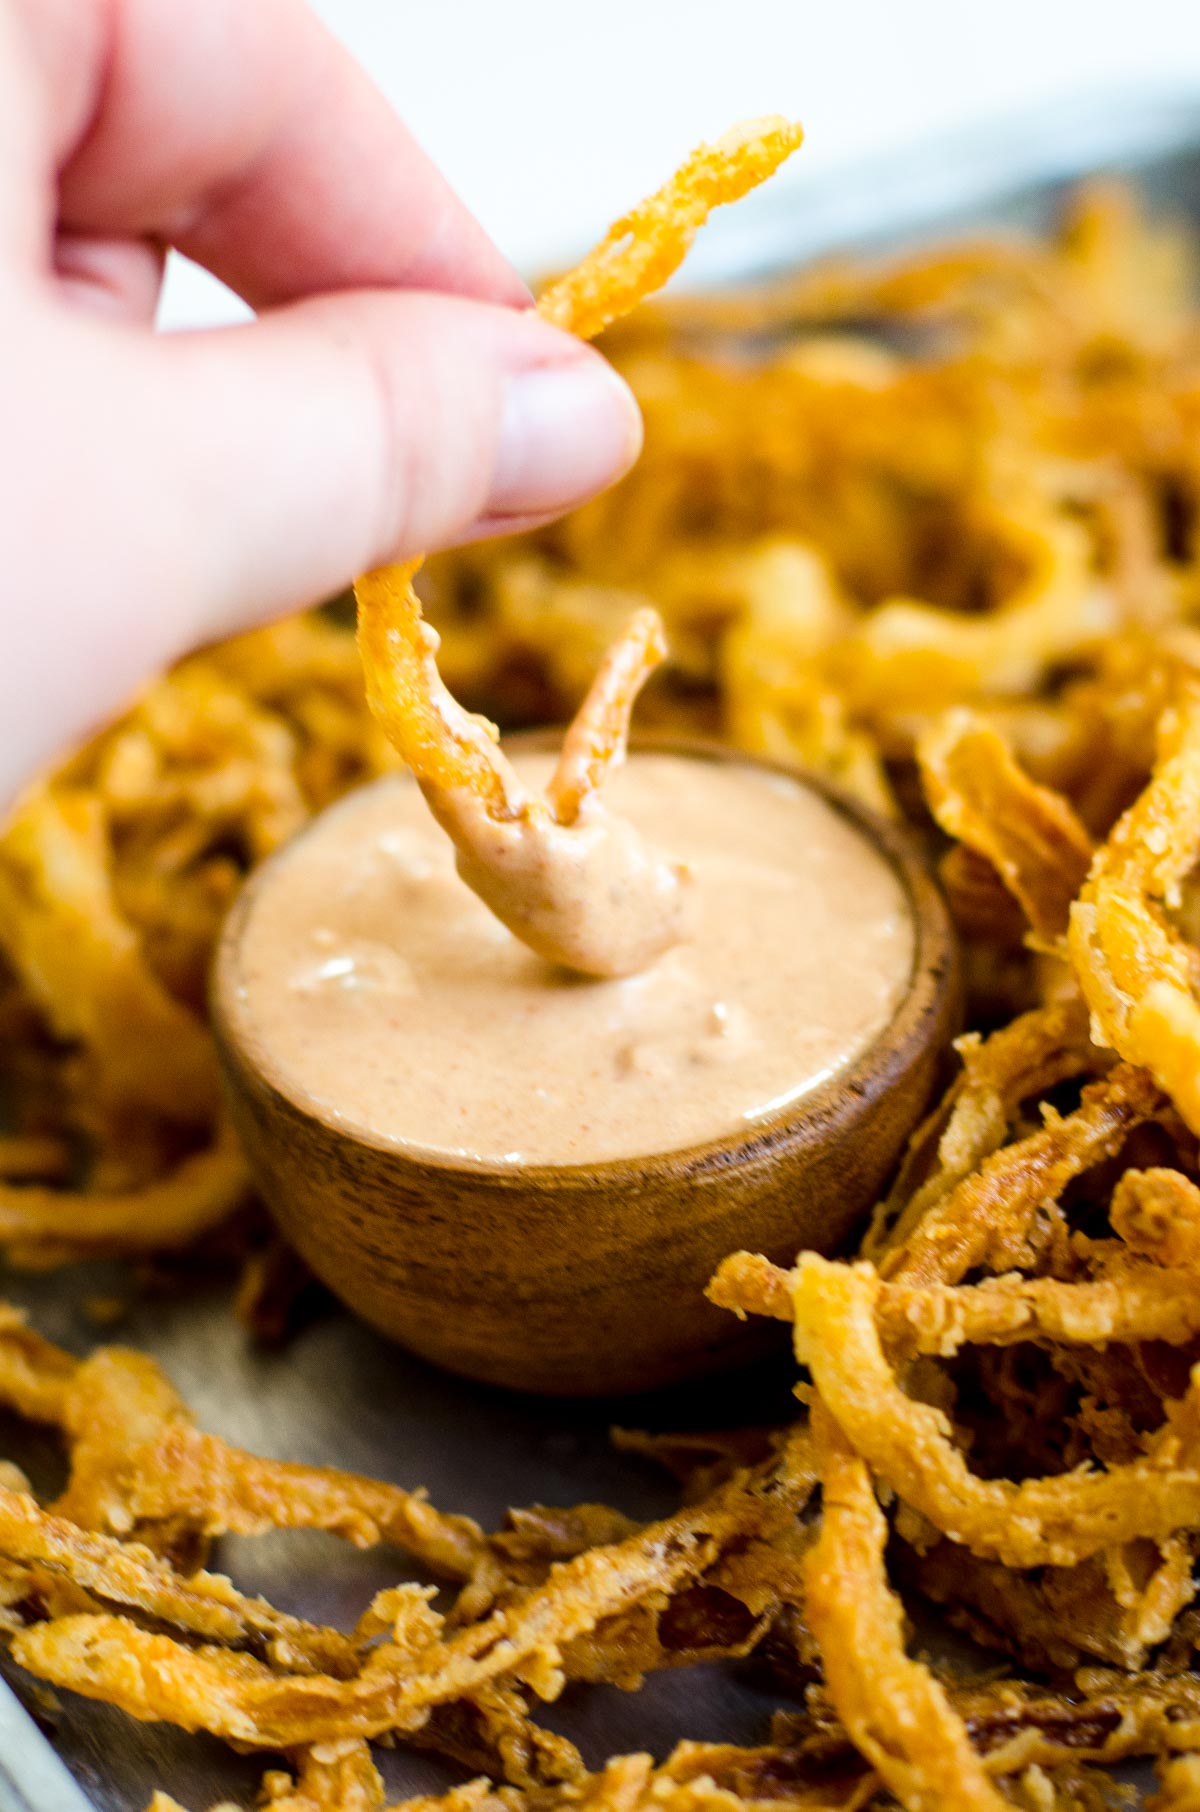 A hand pulling fried onion strings out of dipping sauce.